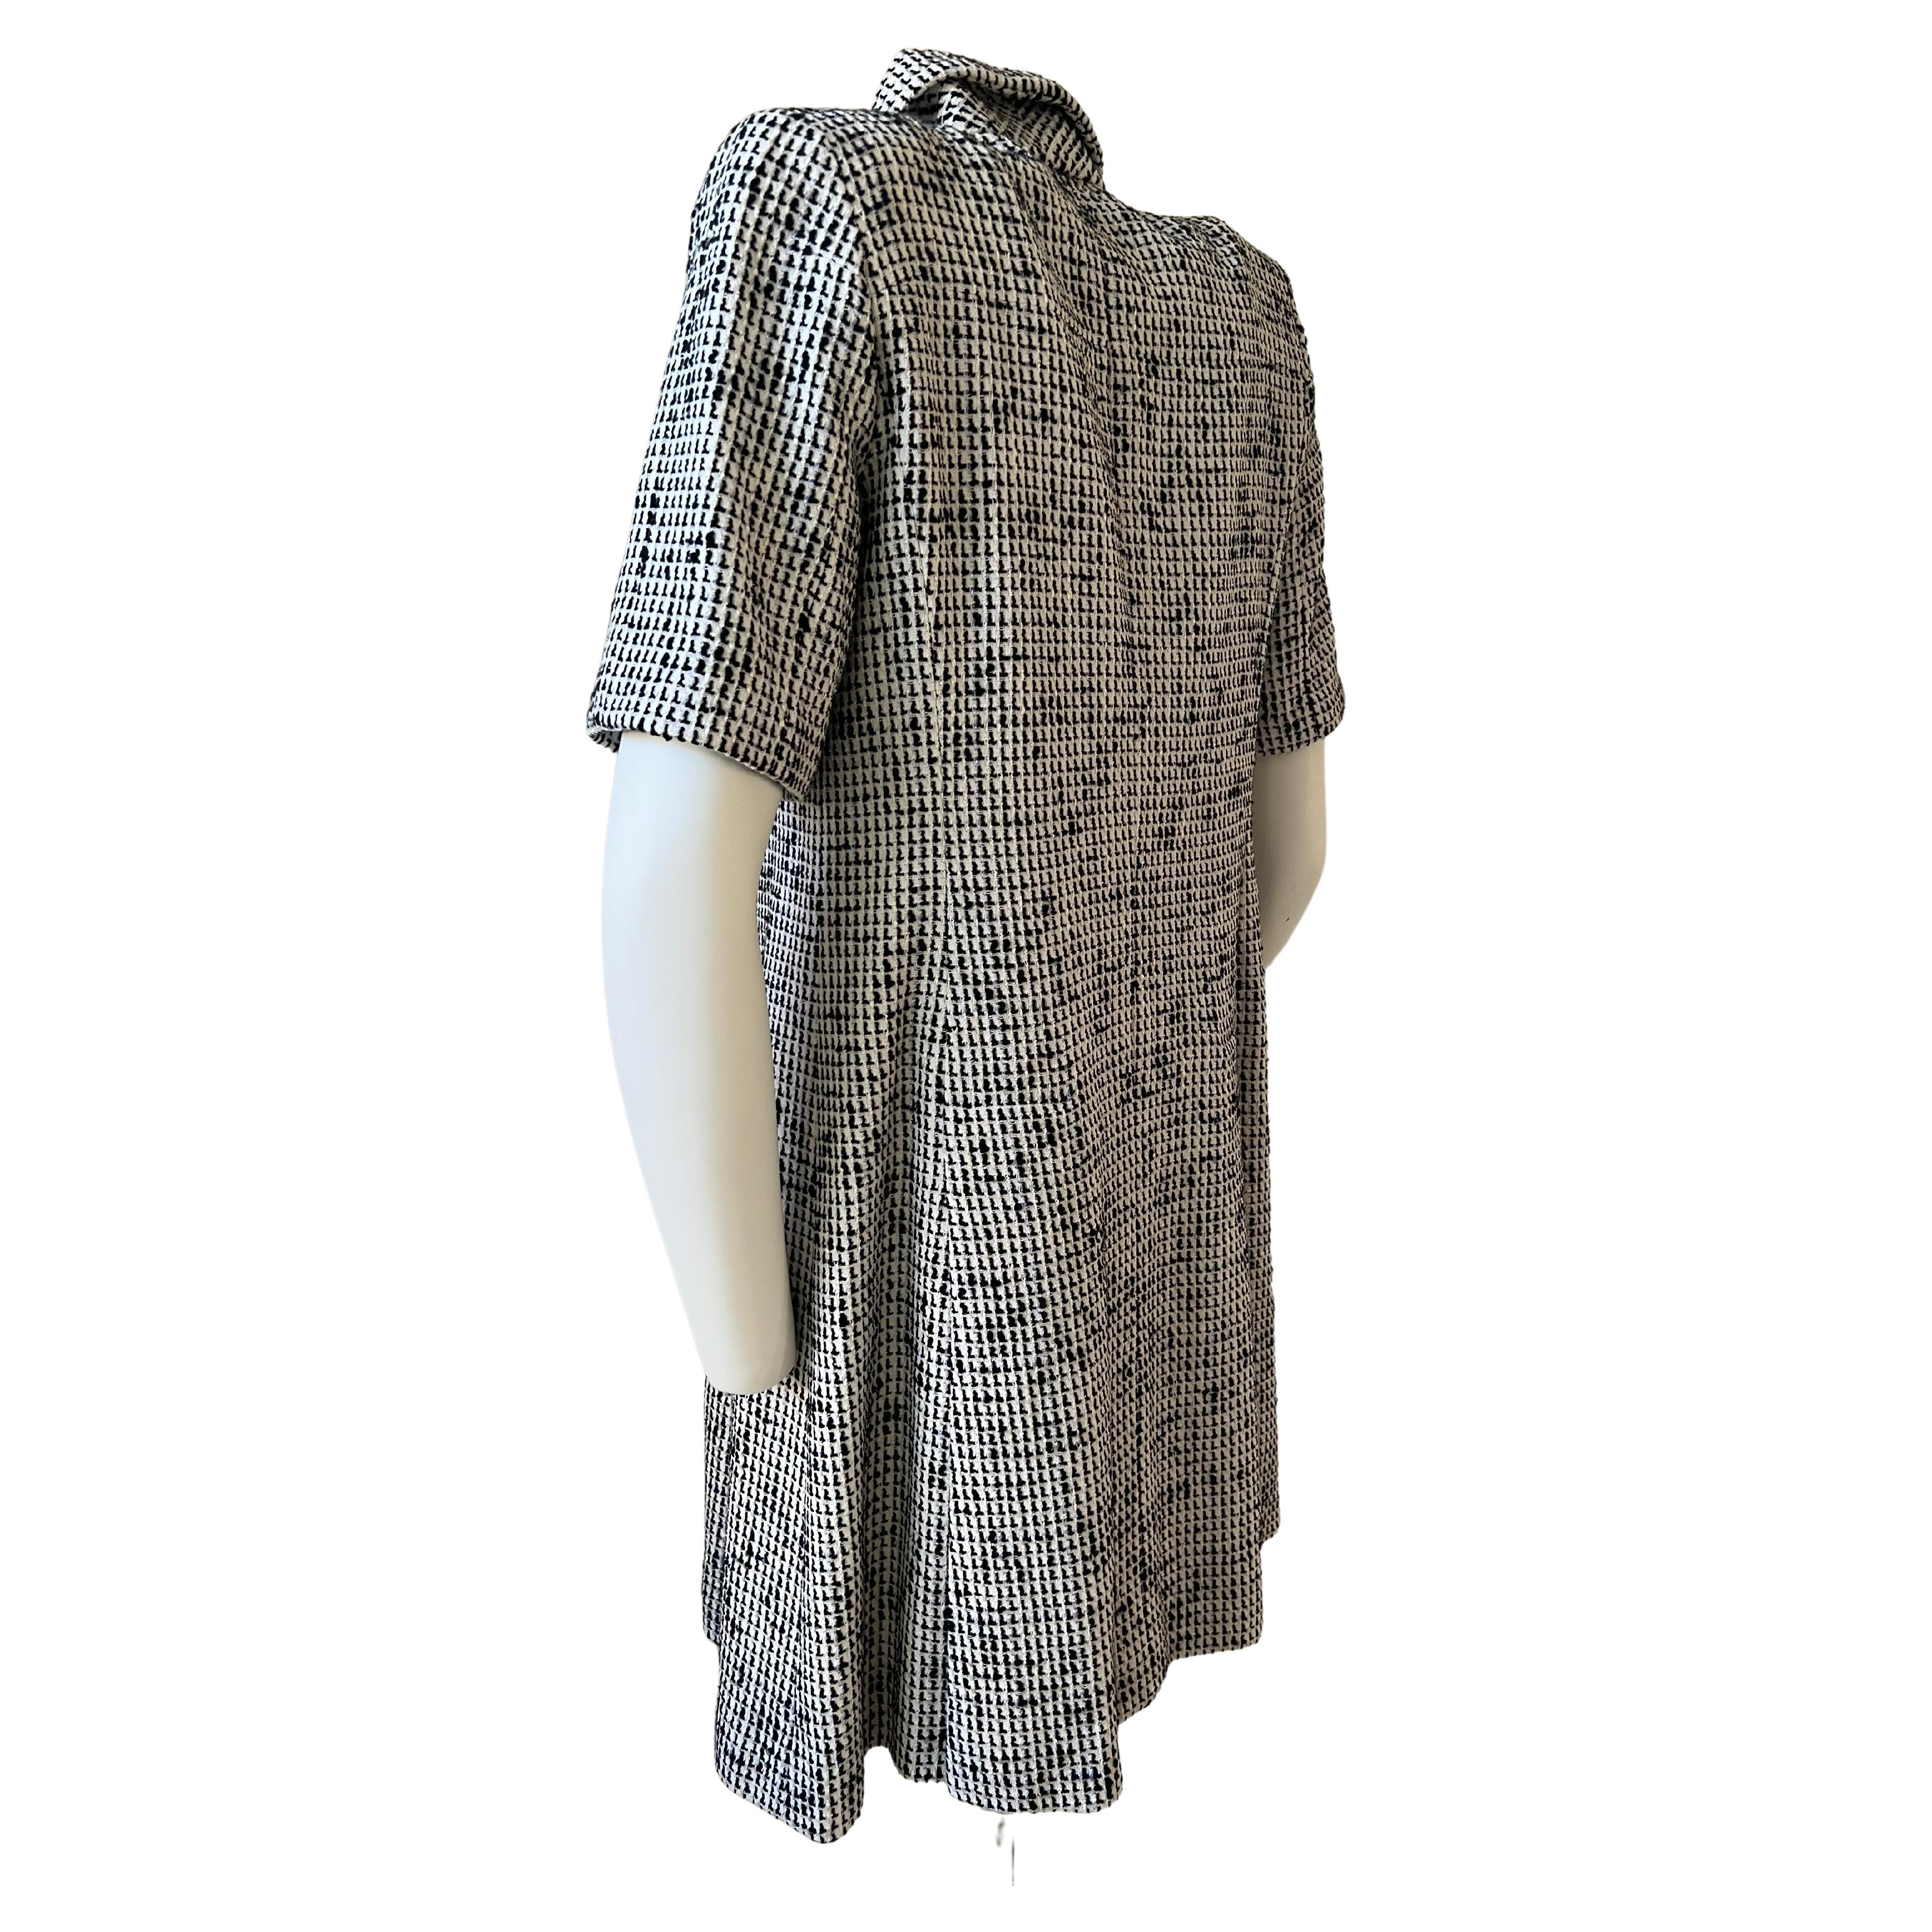 Chanel Dress Coat Black and White Tweed 2010 For Sale 1